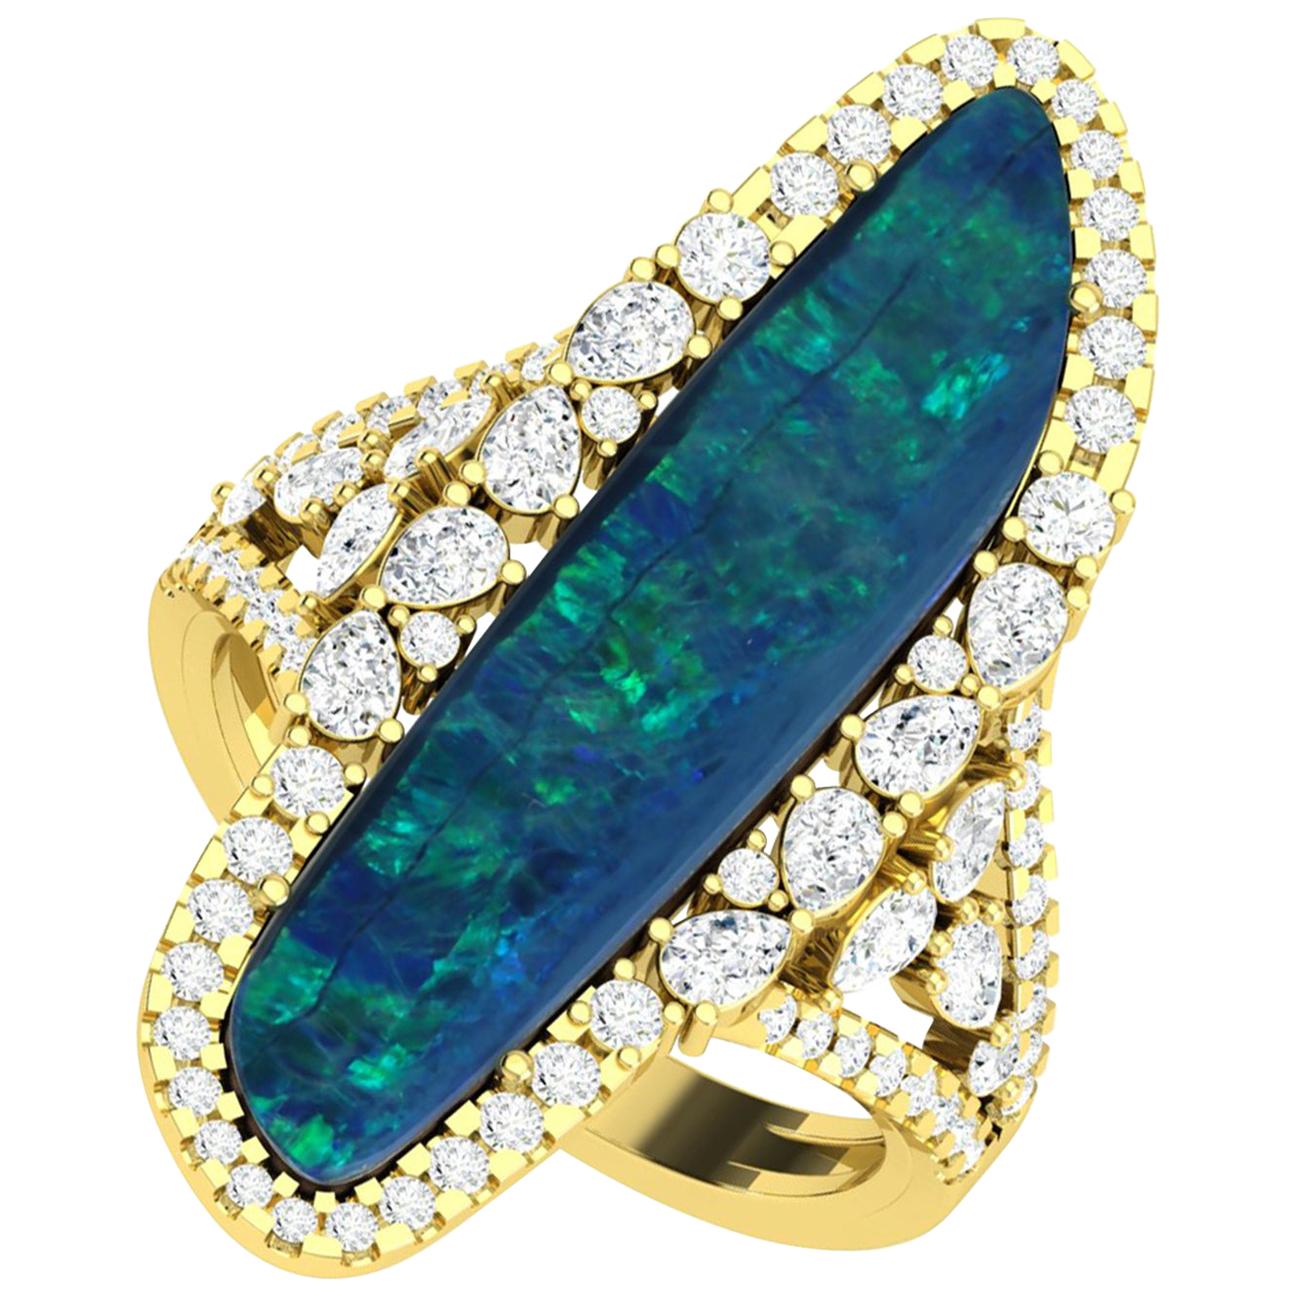 4.35ct Opal Ring With Diamonds Made In 18 Karat Yellow Gold 